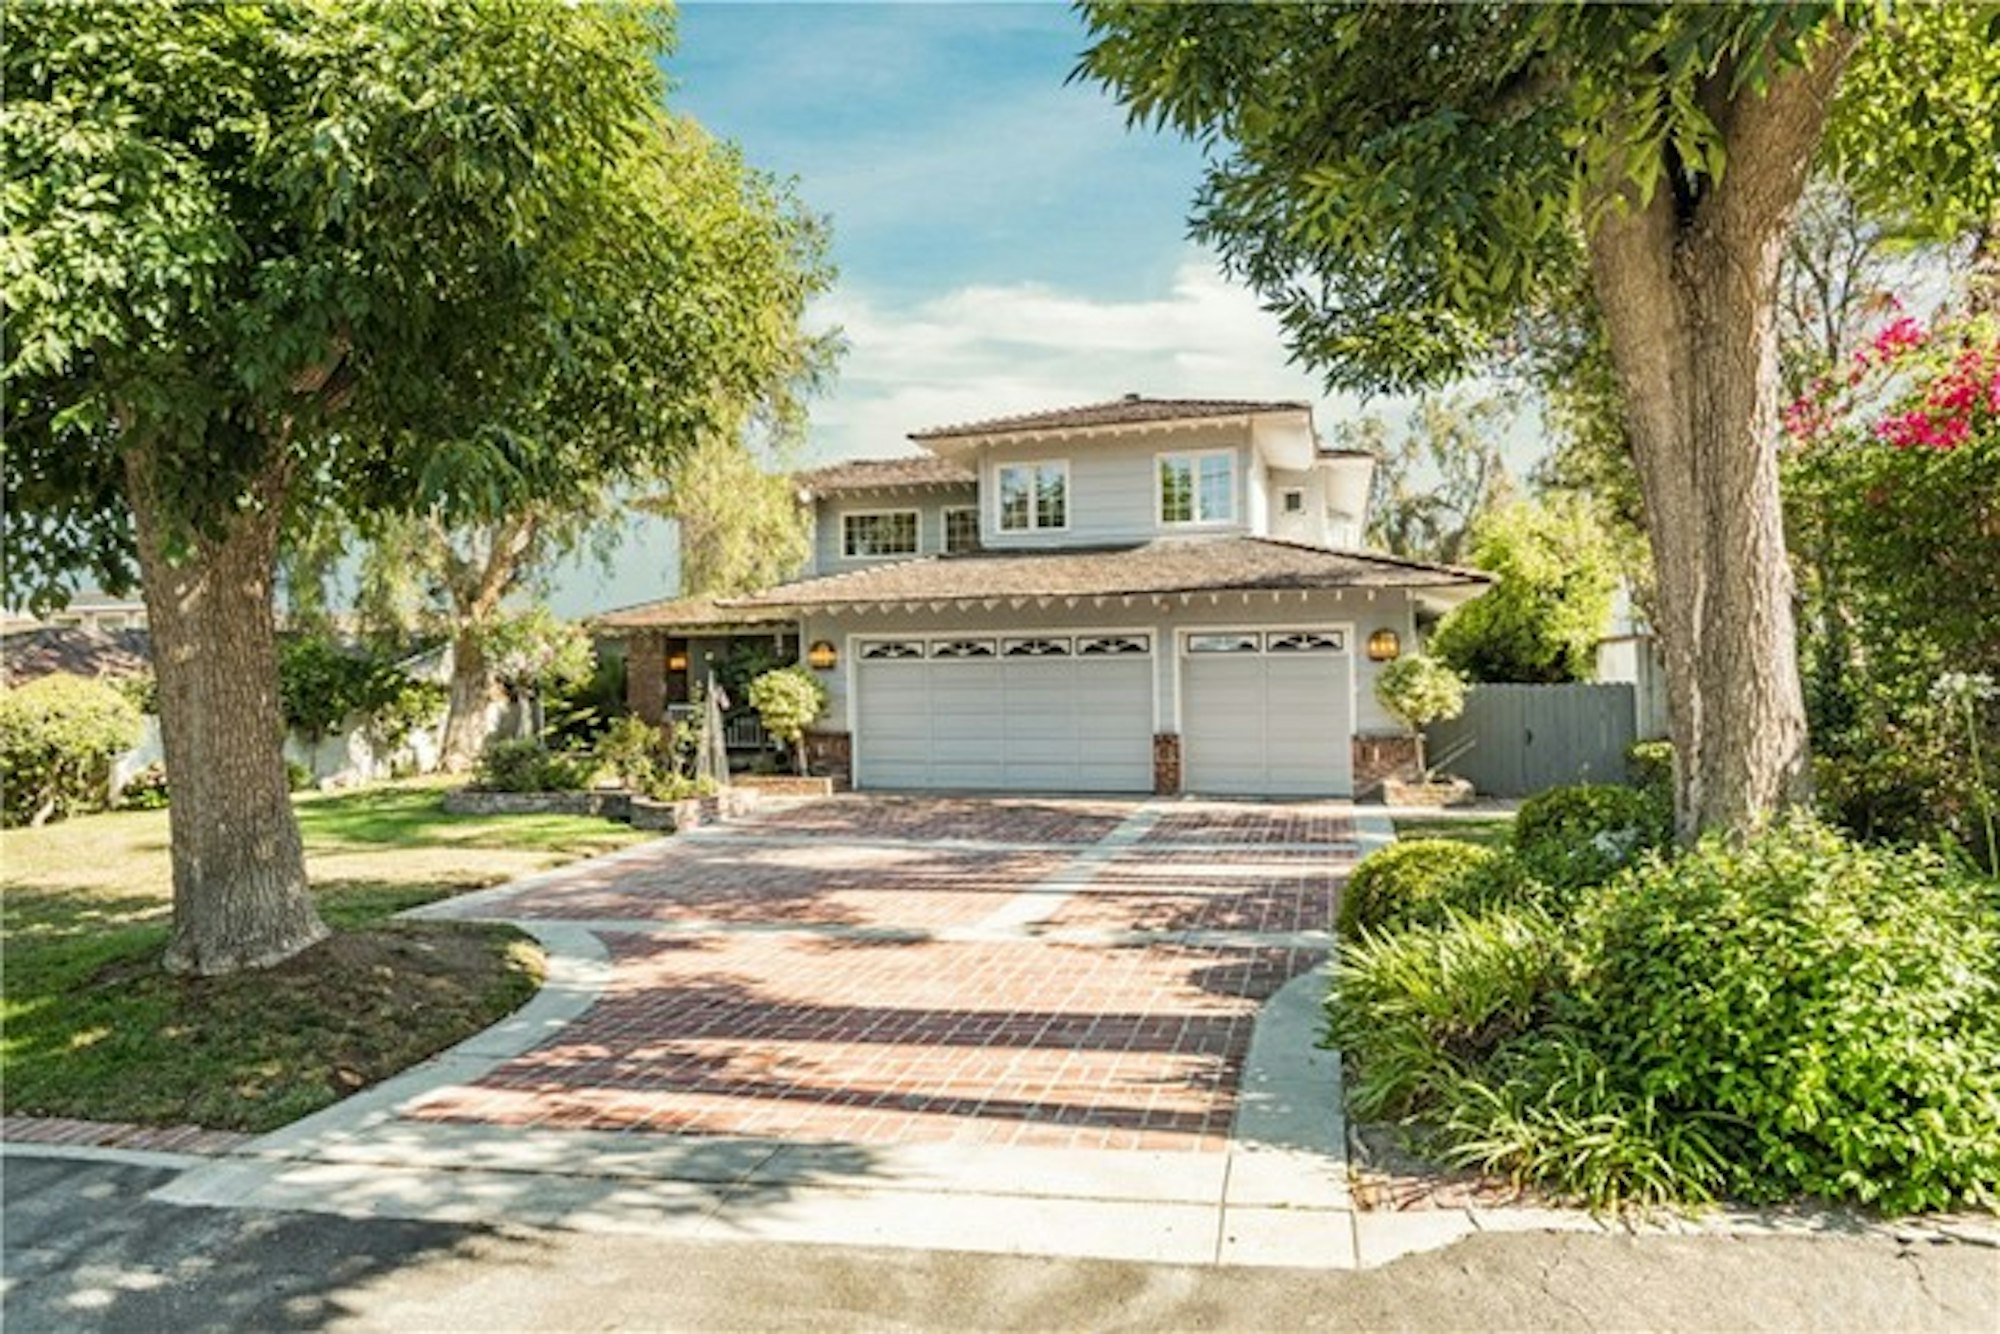 Photo 1 of 43 - 40 Ranchview Rd, Rolling Hills Estates, CA 90274